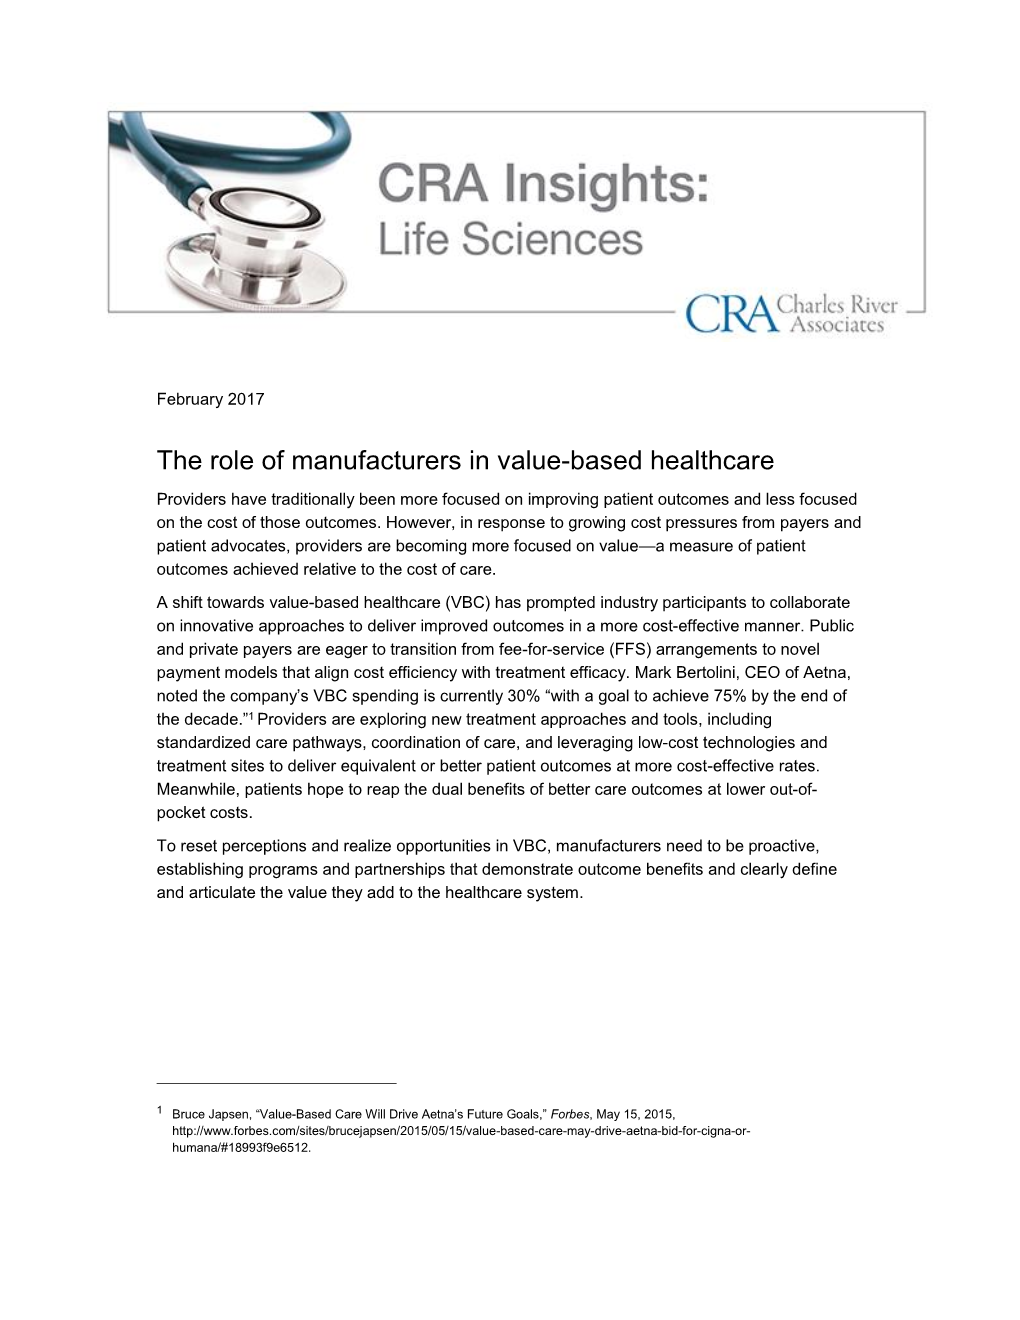 The Role of Manufacturers in Value-Based Healthcare